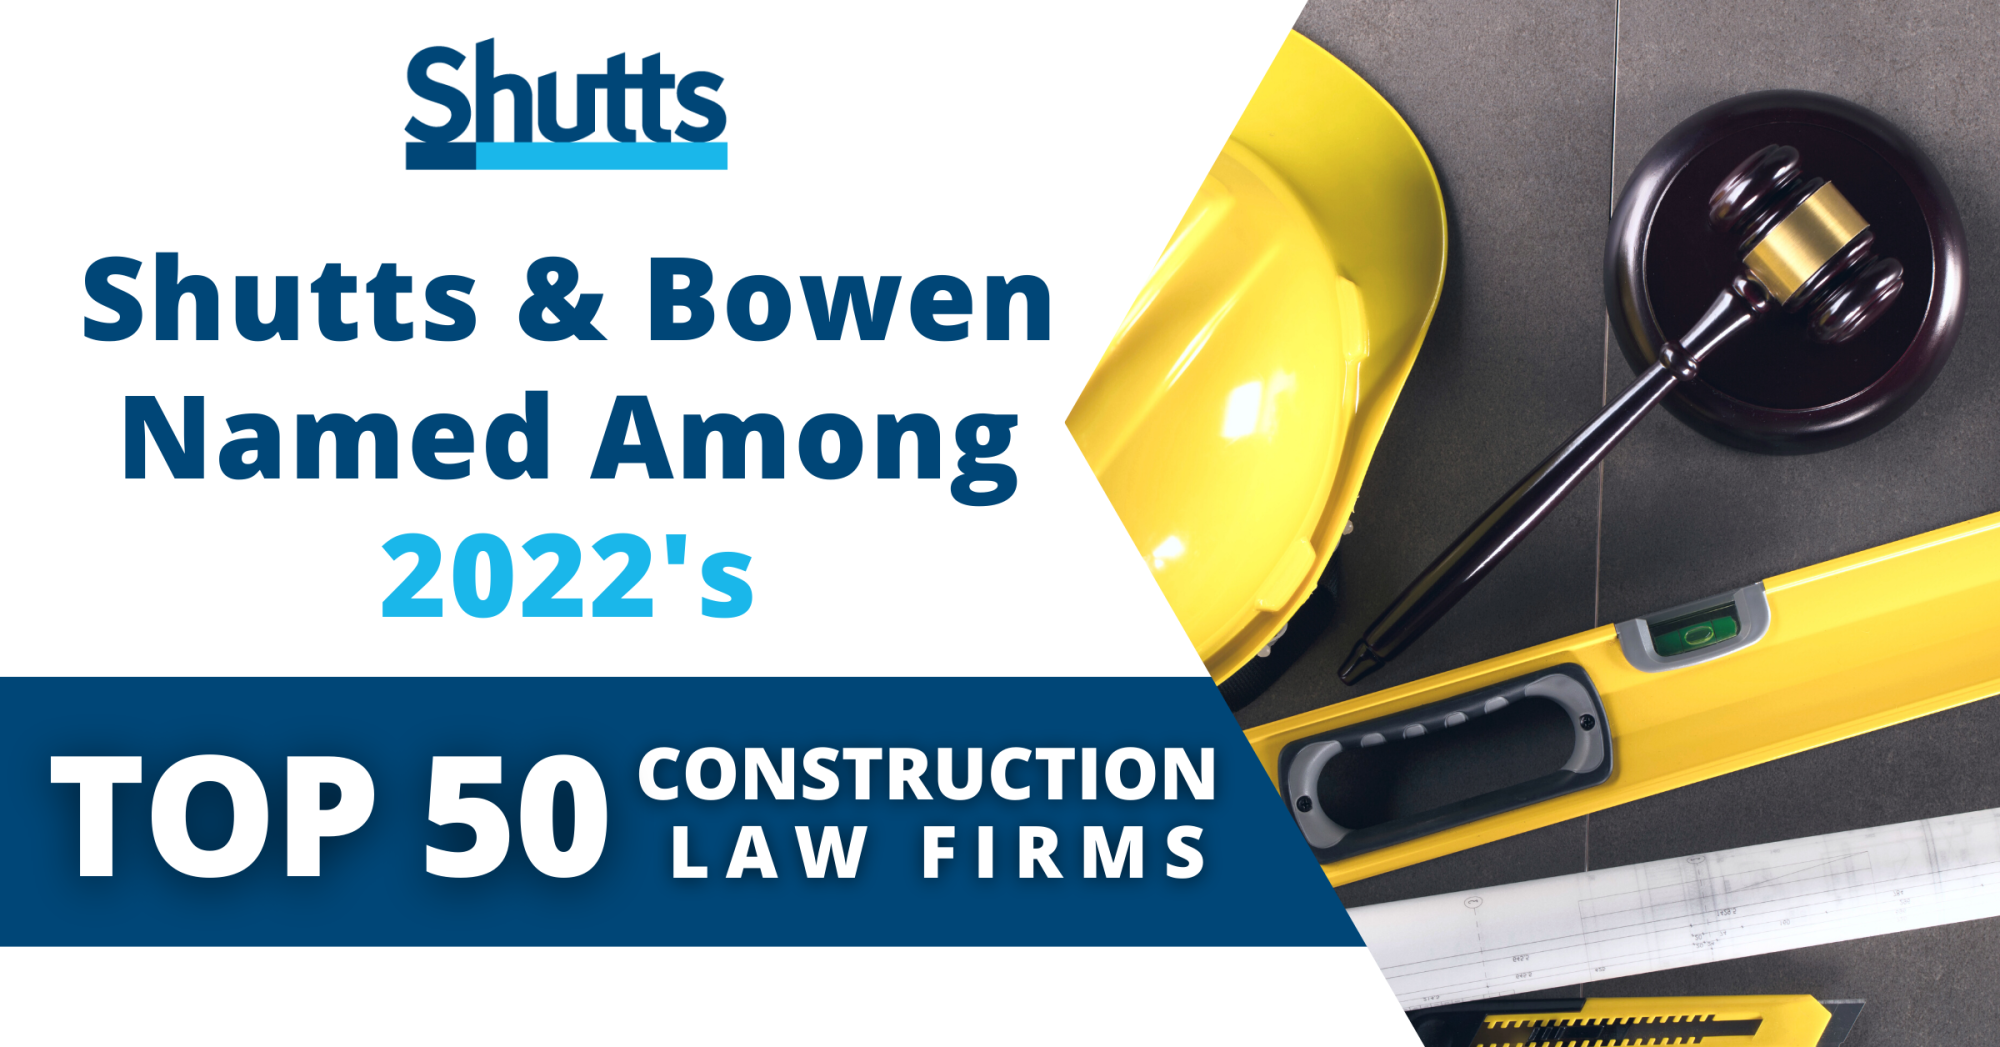 Shutts & Bowen Named Among 2022’s Top 50 Construction Law Firms